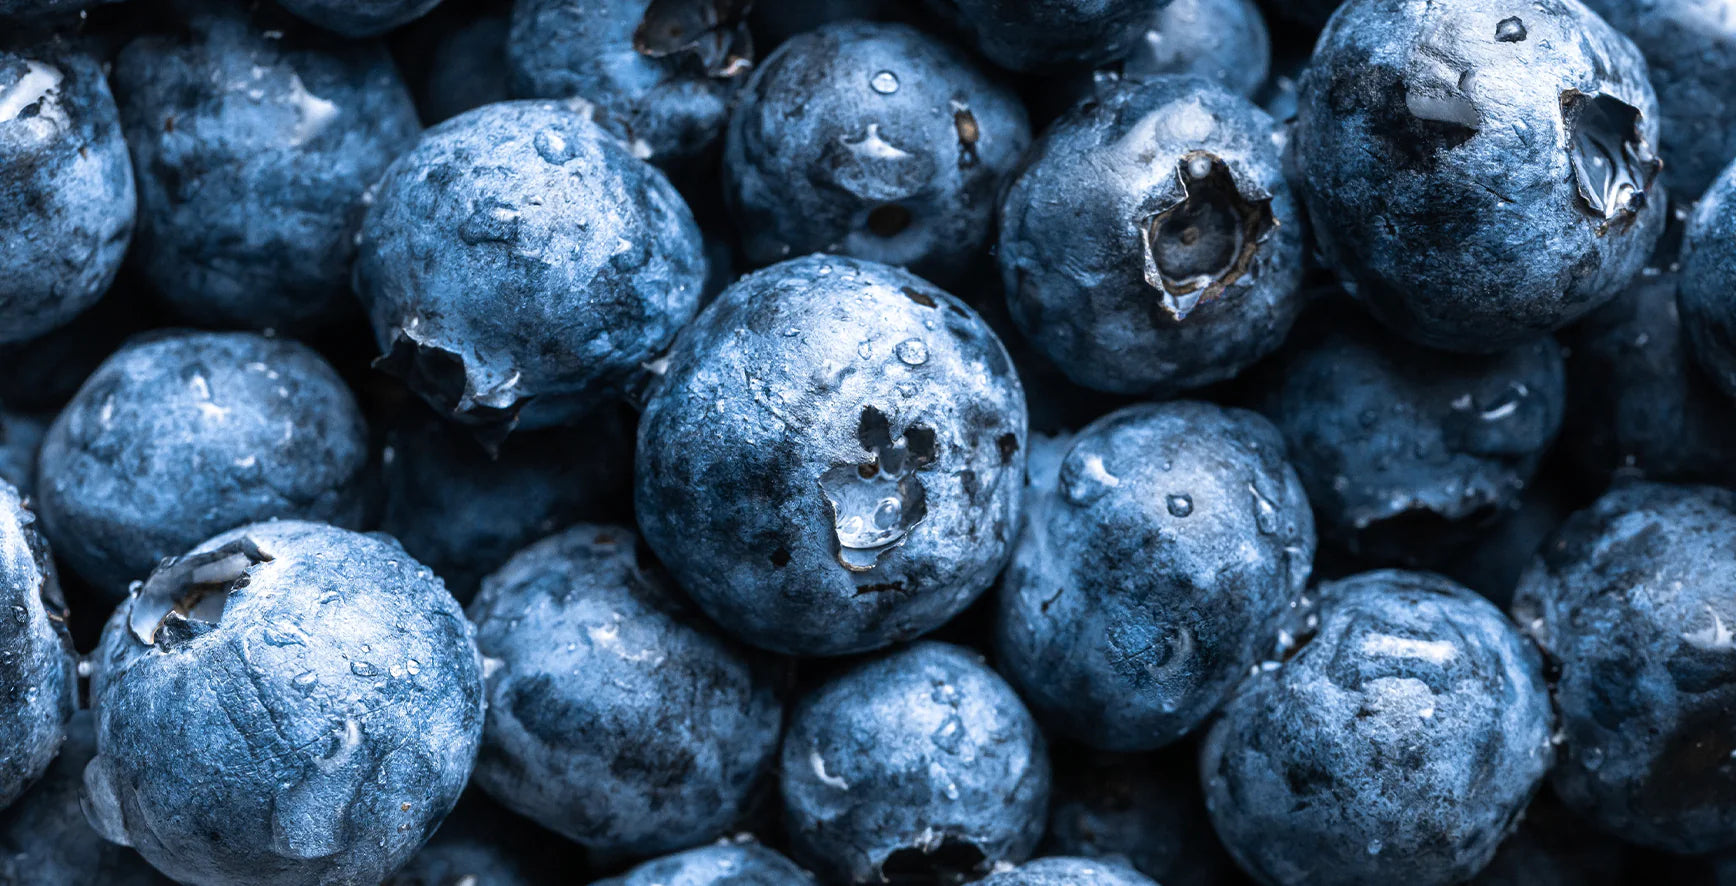 The Blueberry: A Nutrient-Packed Wonder